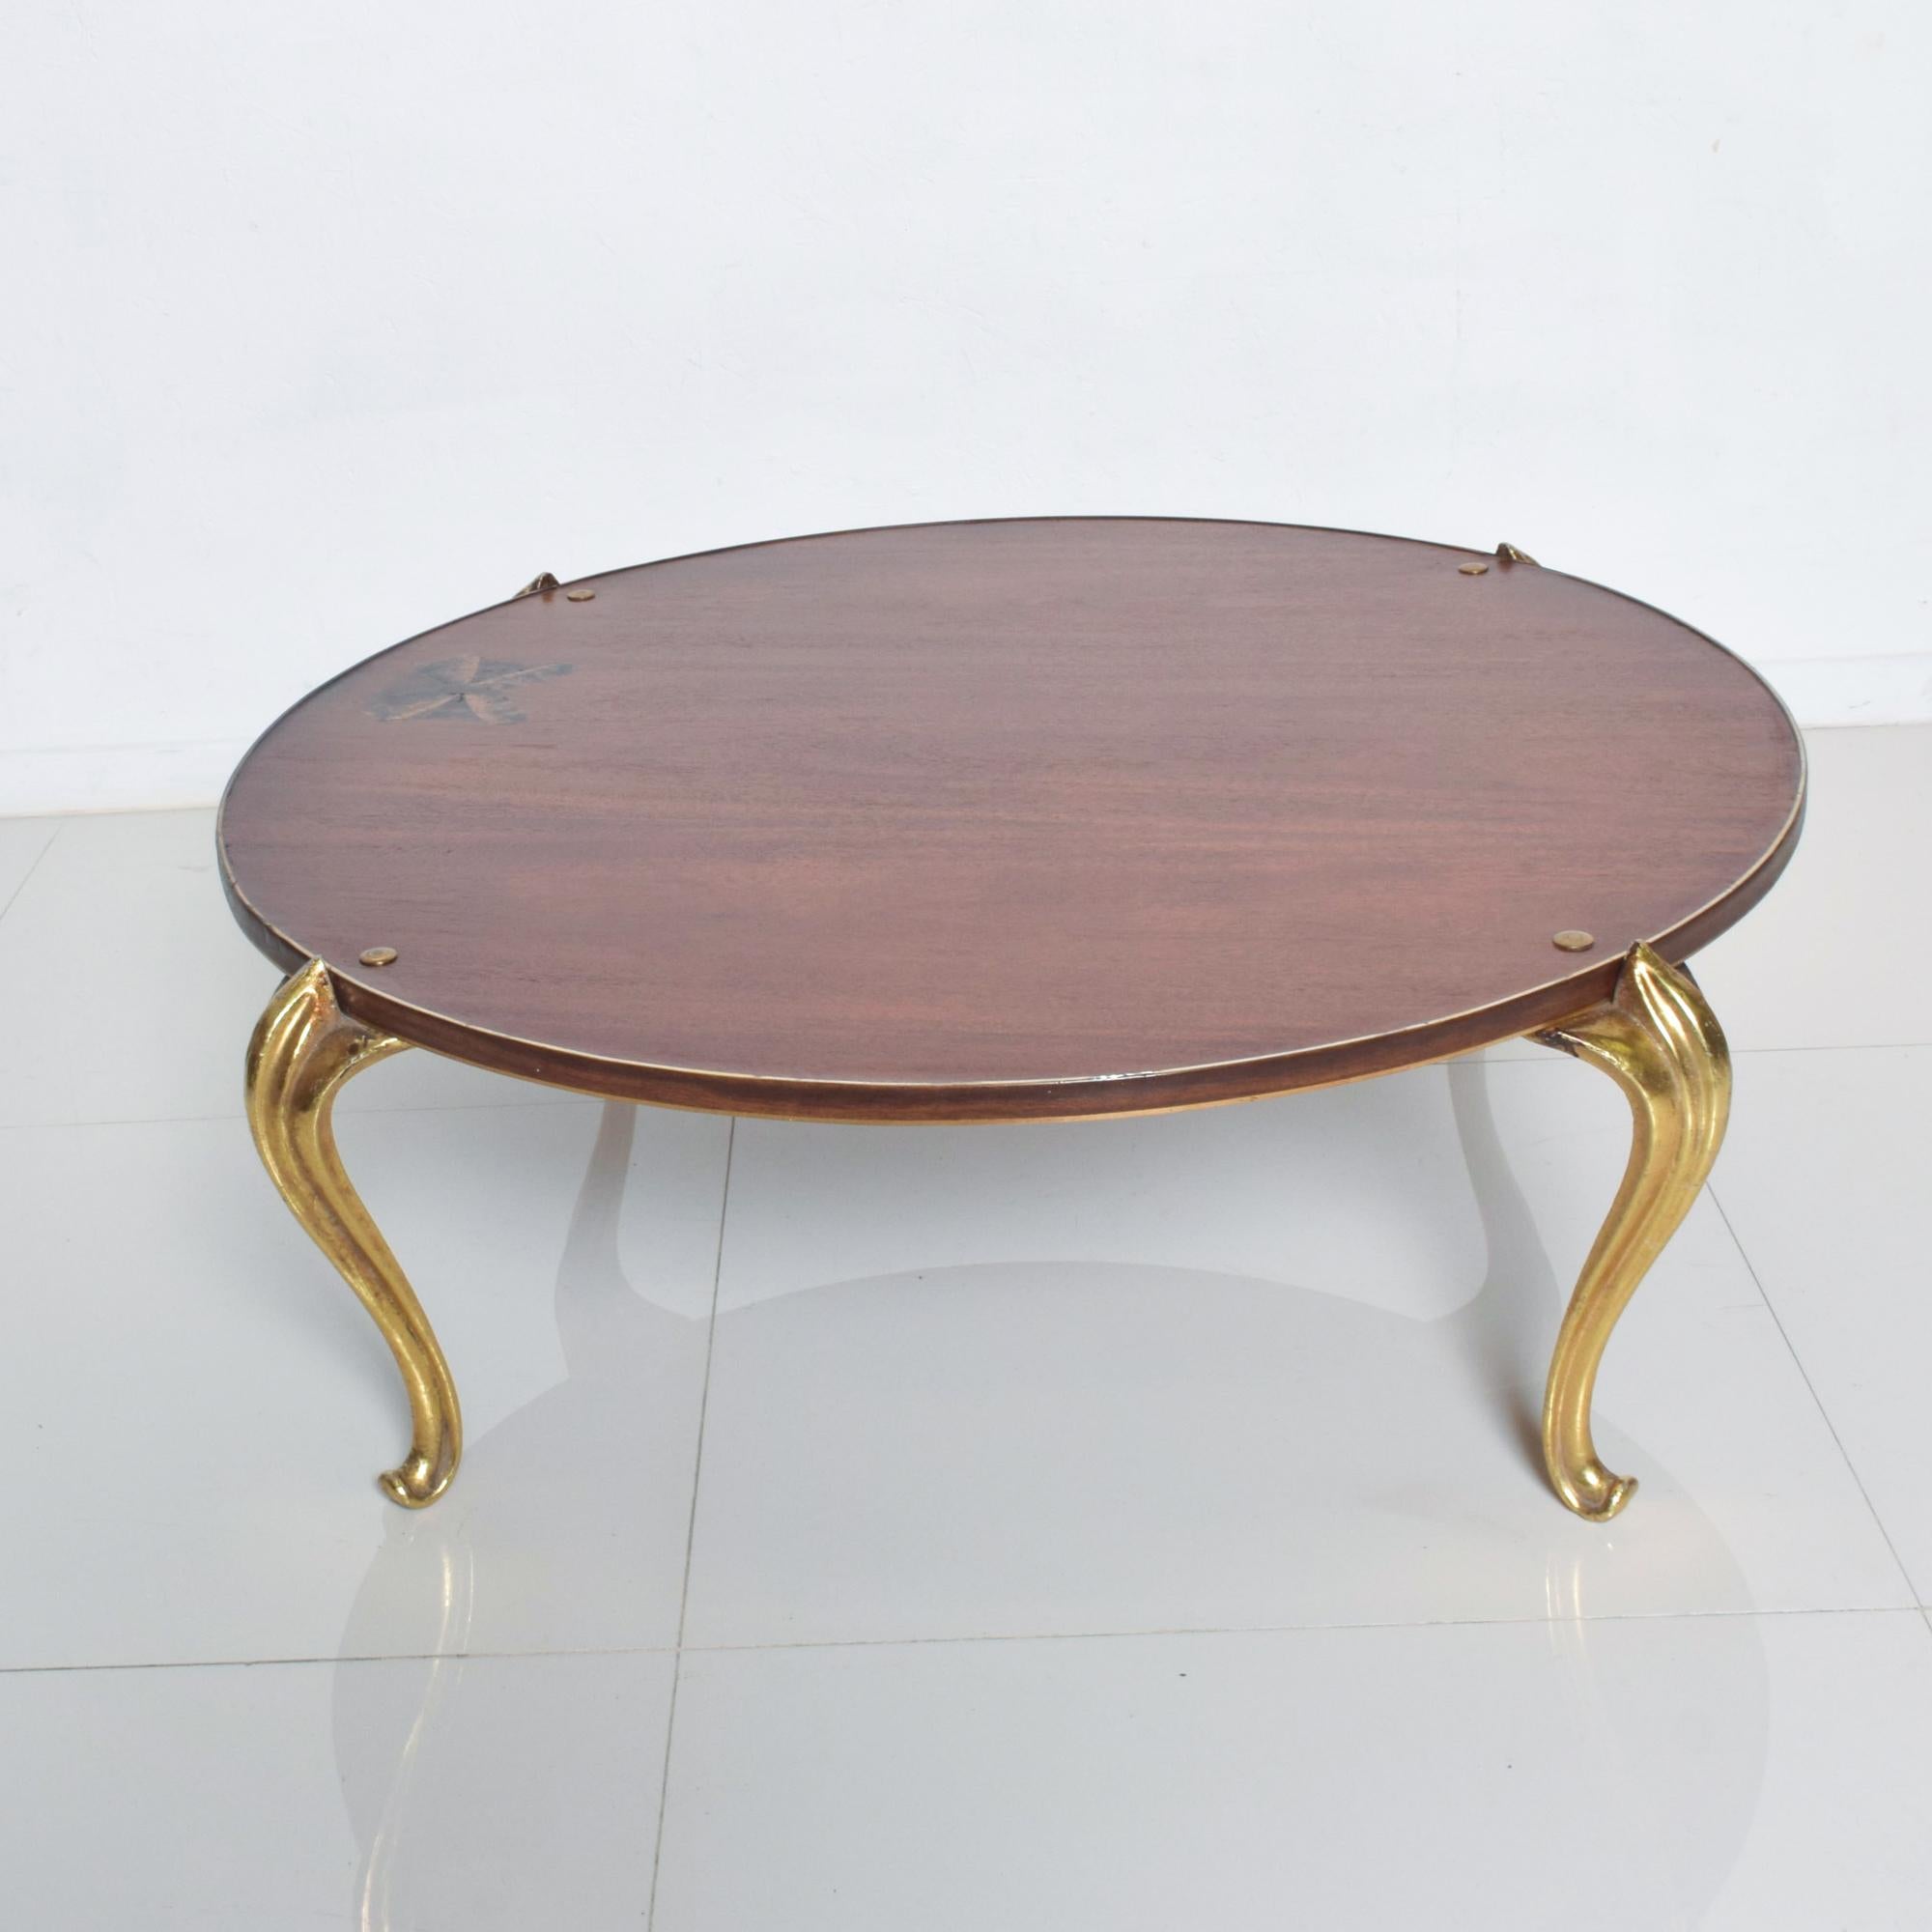 Regency Bespoke Butterfly Inlay Round Wood Coffee Table Gold Trim Gilded Cabriole Legs For Sale